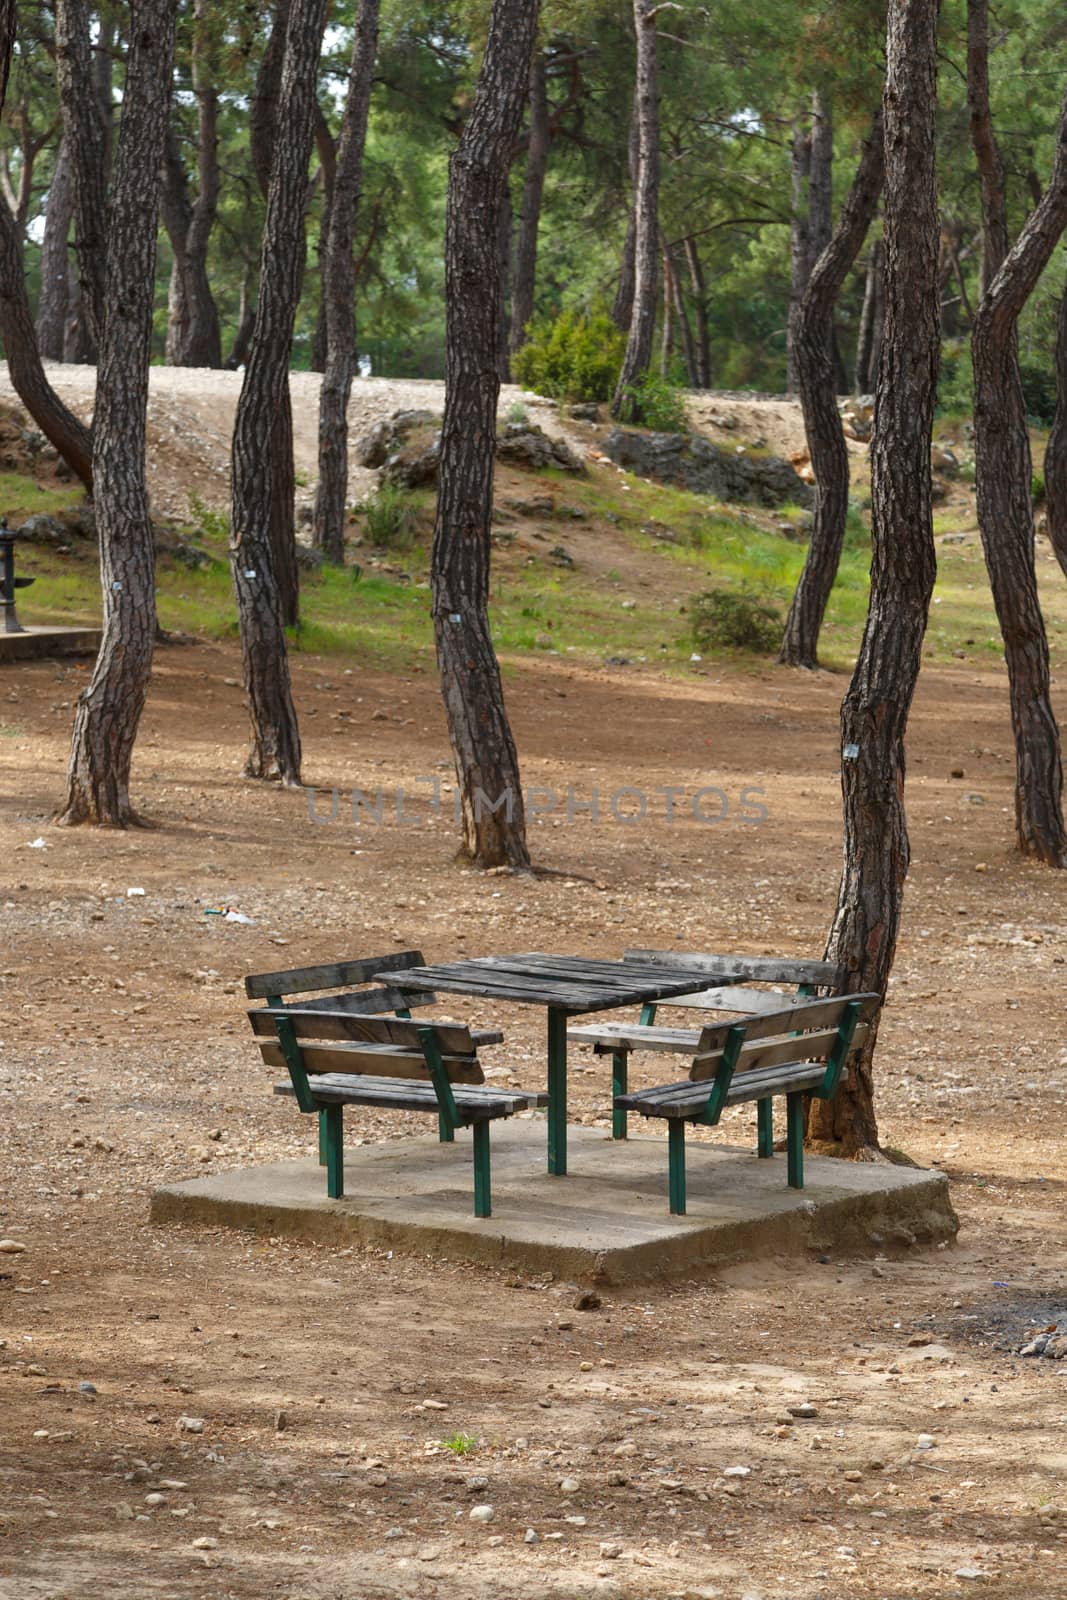 View of natural park with table and benches around big trees.